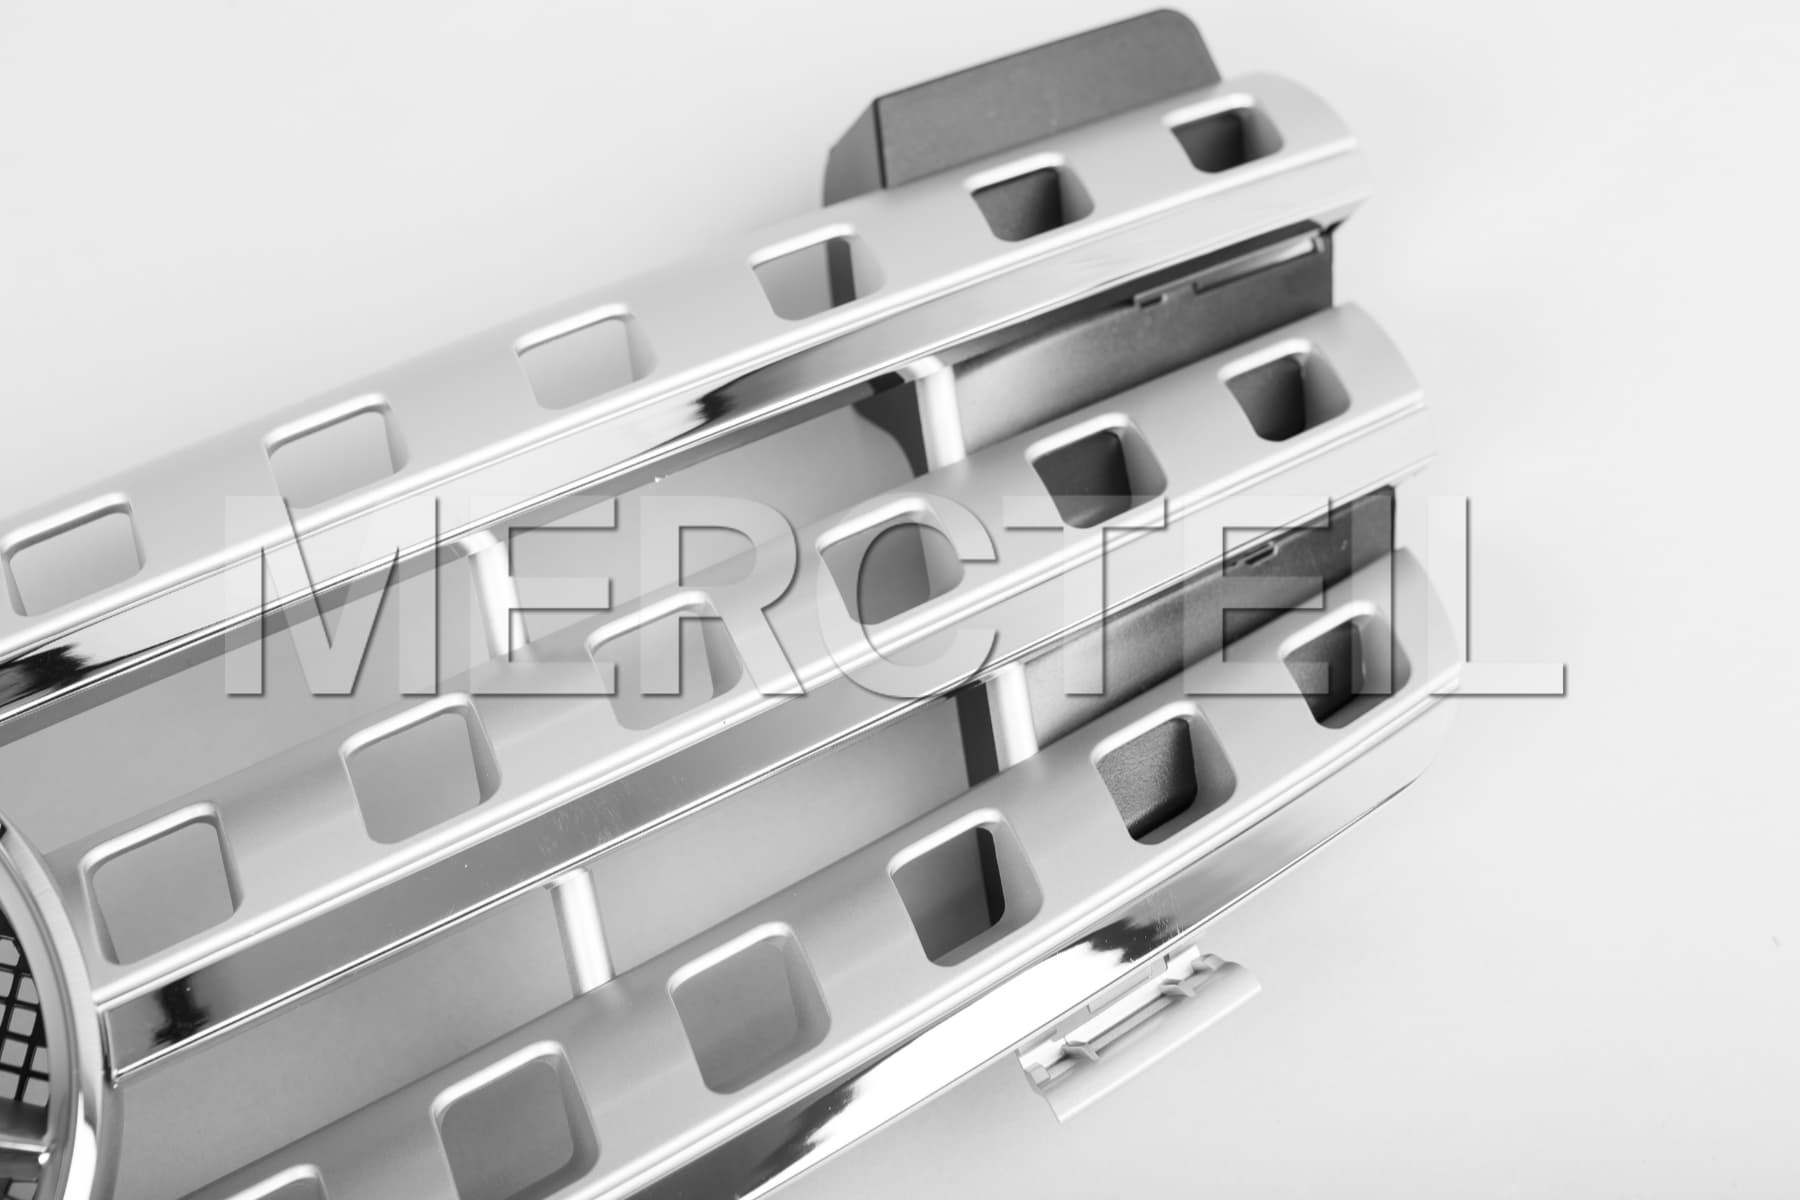 ML Class Radiator Grille with Chrome Ribs W164 Genuine Mercedes AMG (part number: 	
B66880354)